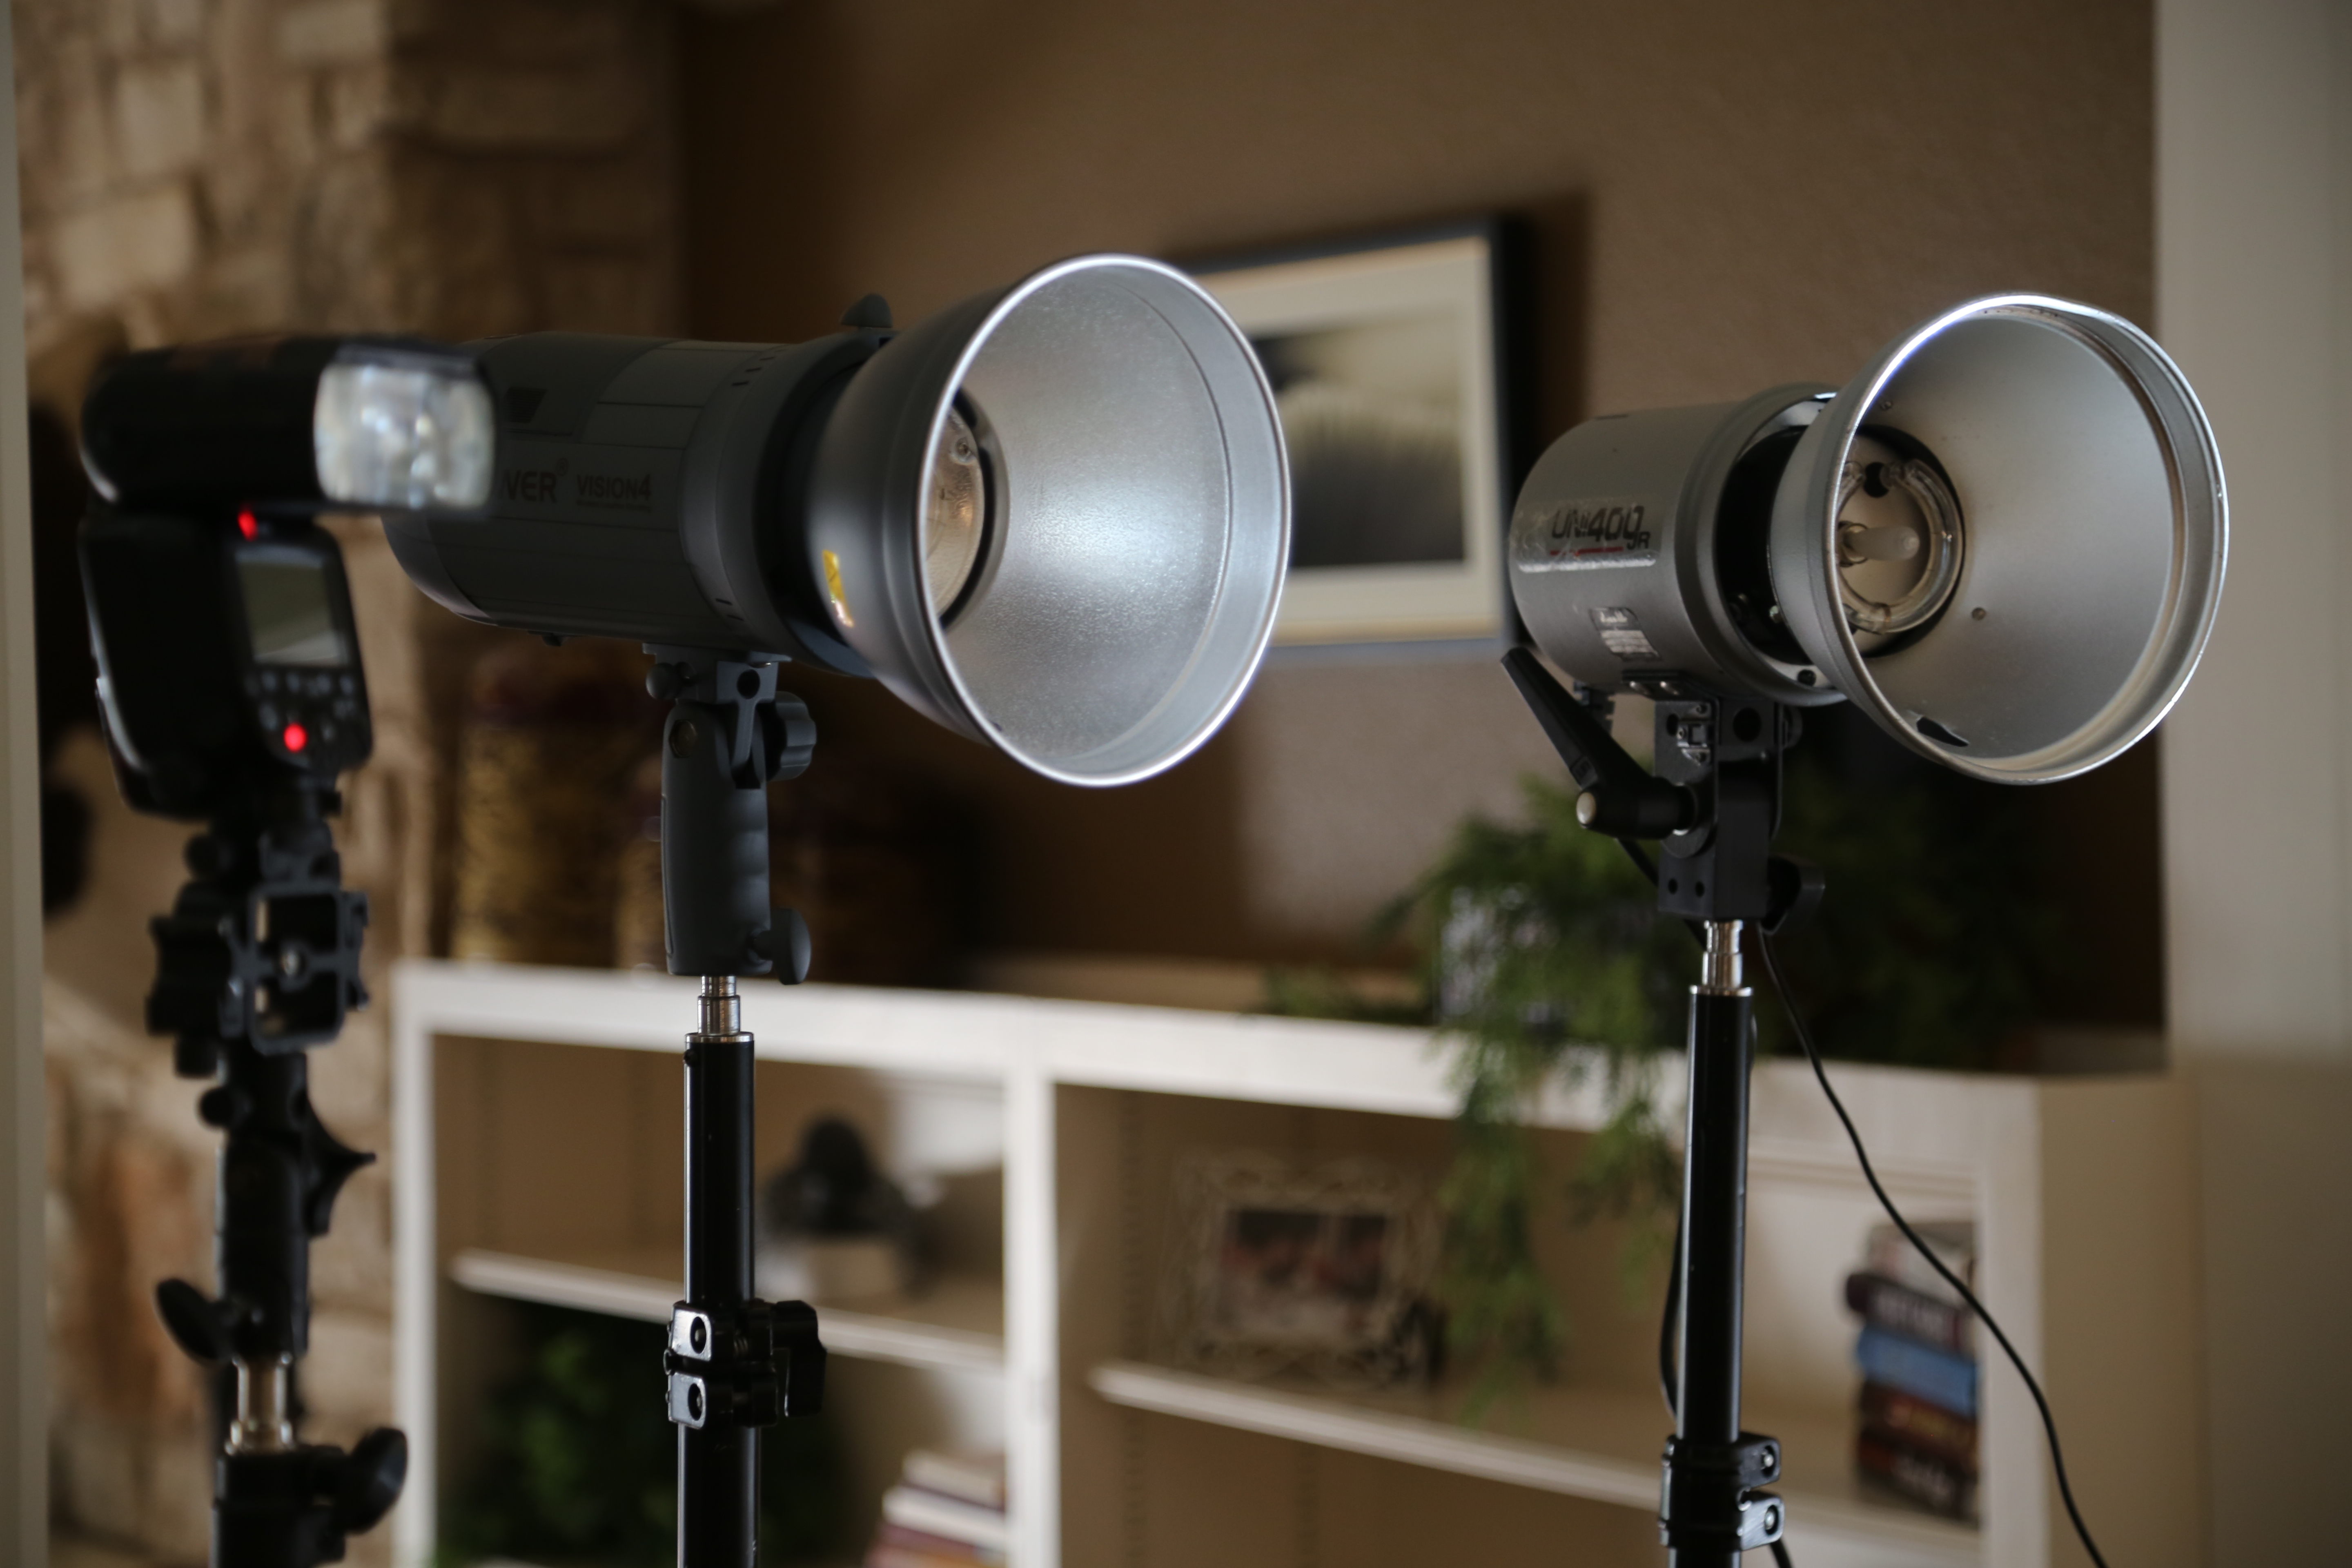 Light output test for Dyna Ultra 400, Neewer Vision 4 and Canon 600 ex rt speedlight